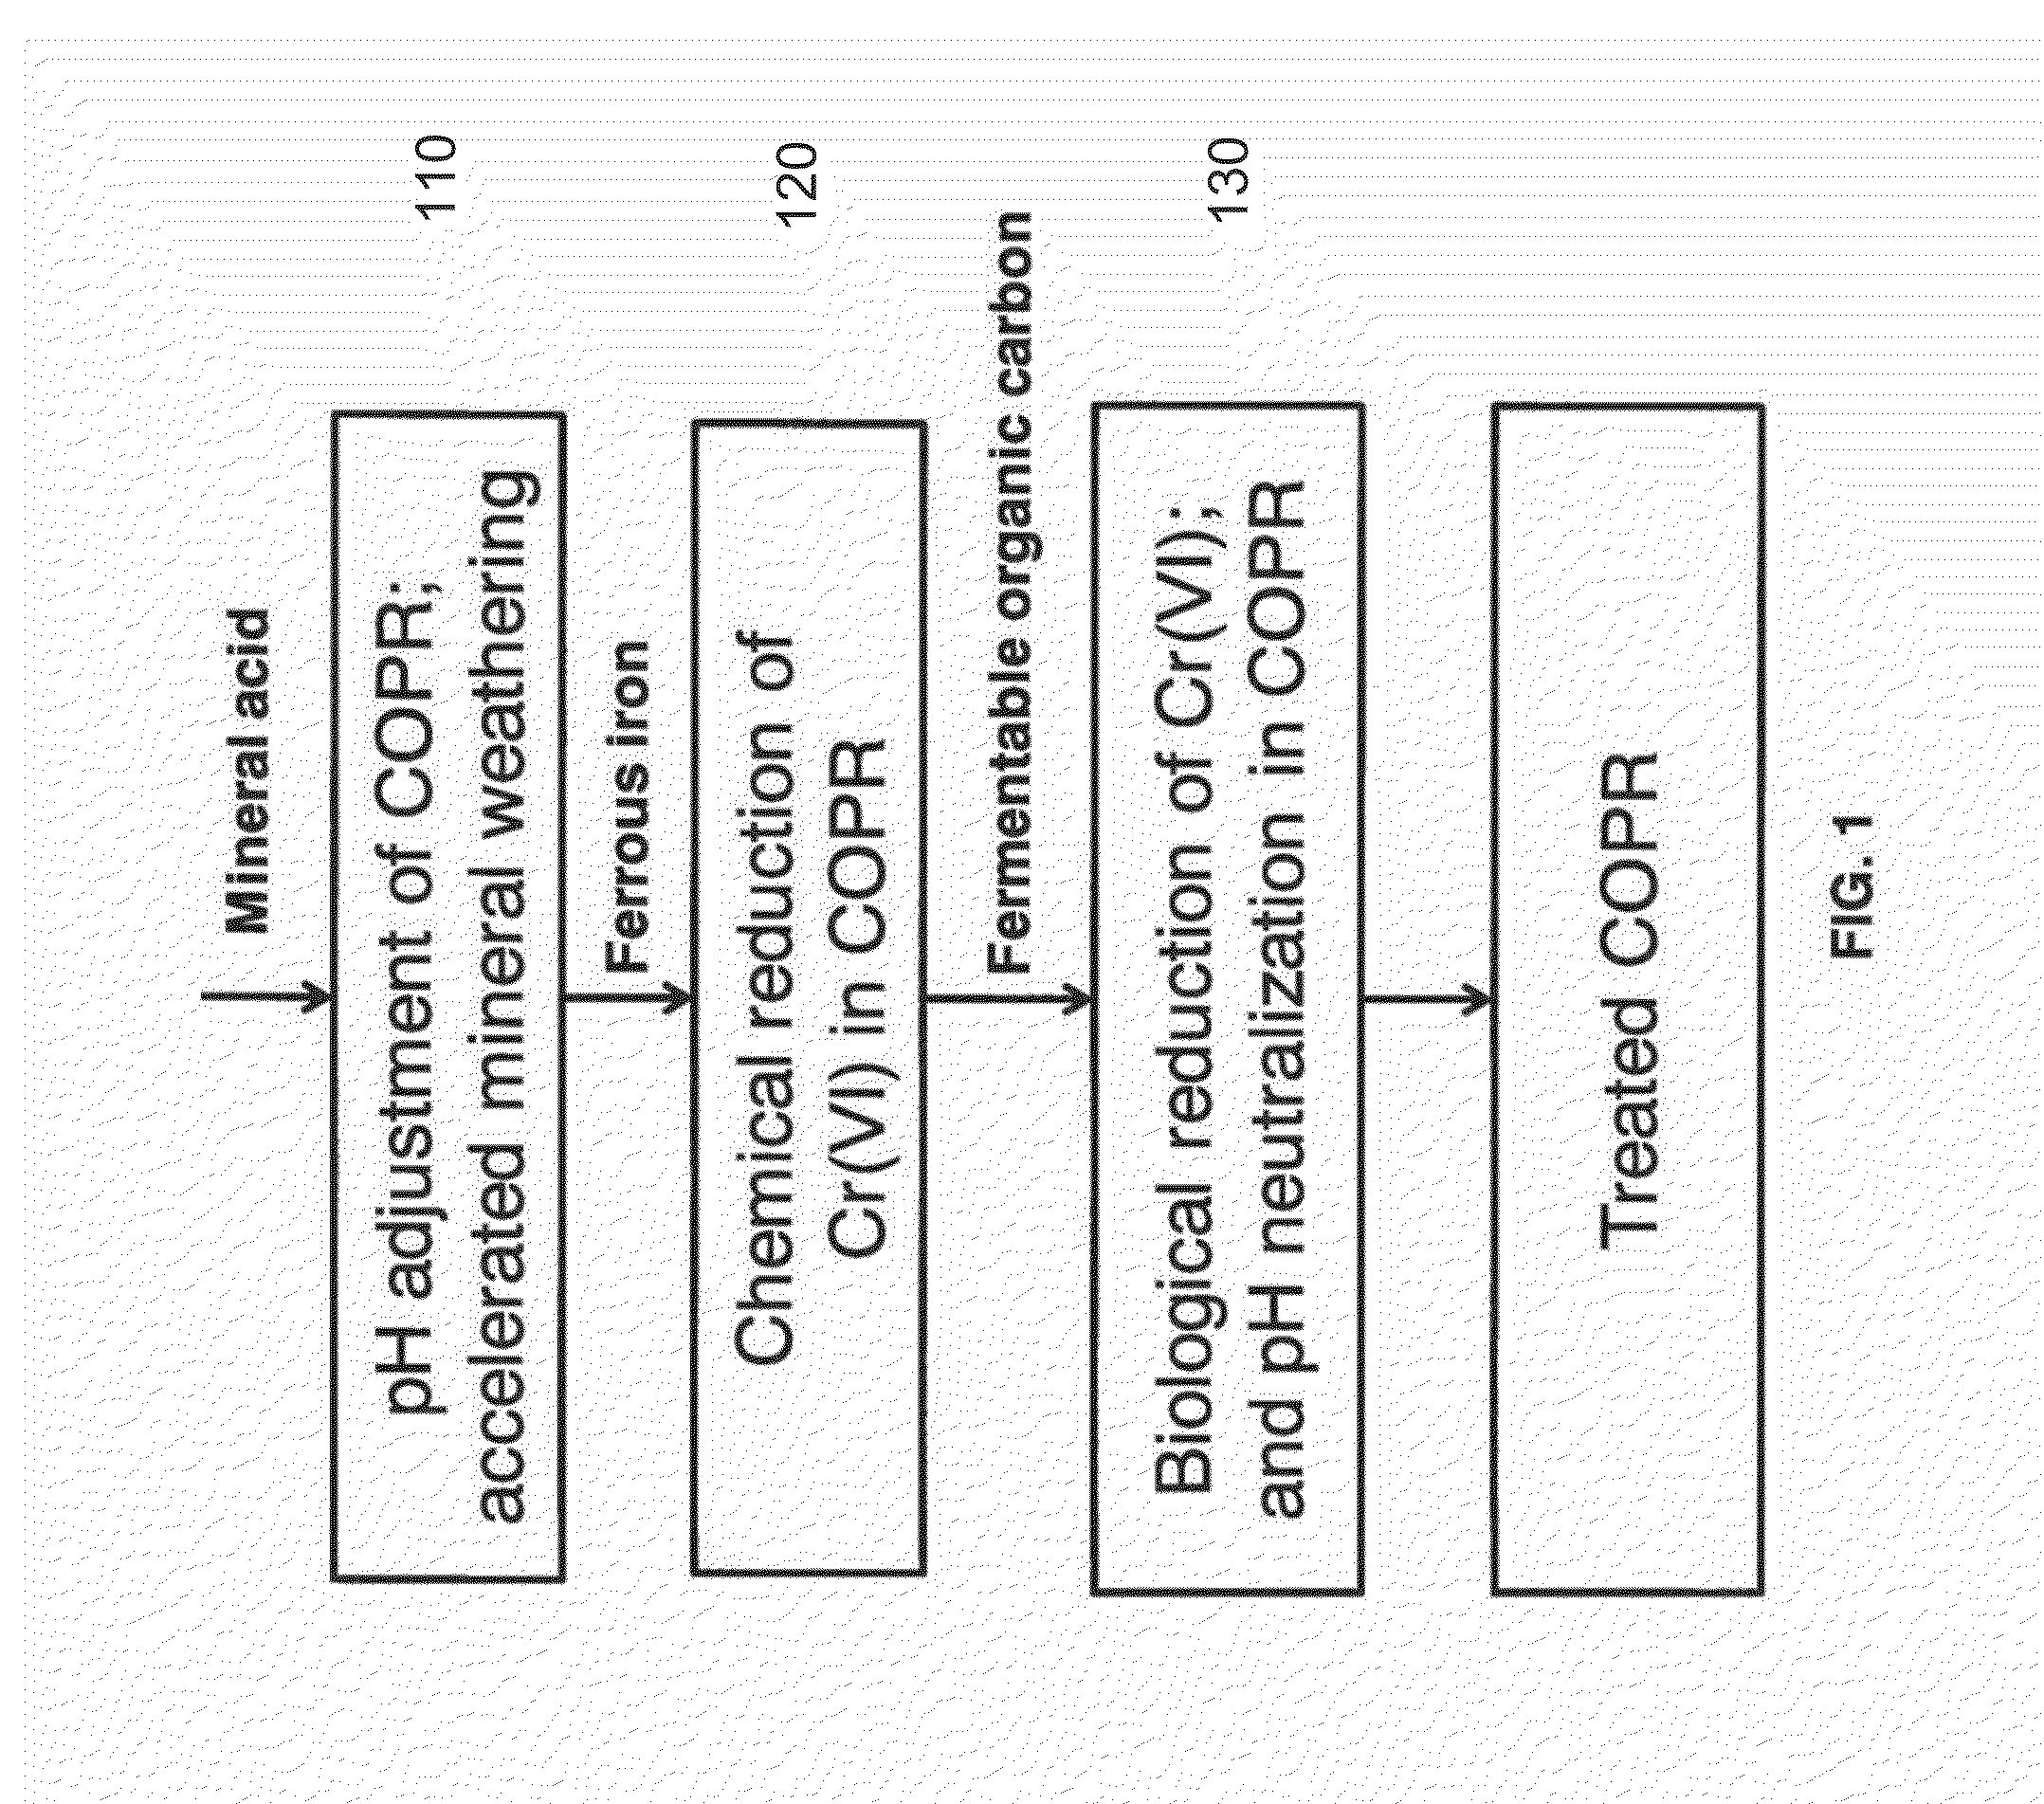 System and Method For Biogeochemical Stabilization of Chromate-Impacted Solids, Including Chromite Ore Processing Residue (COPR)